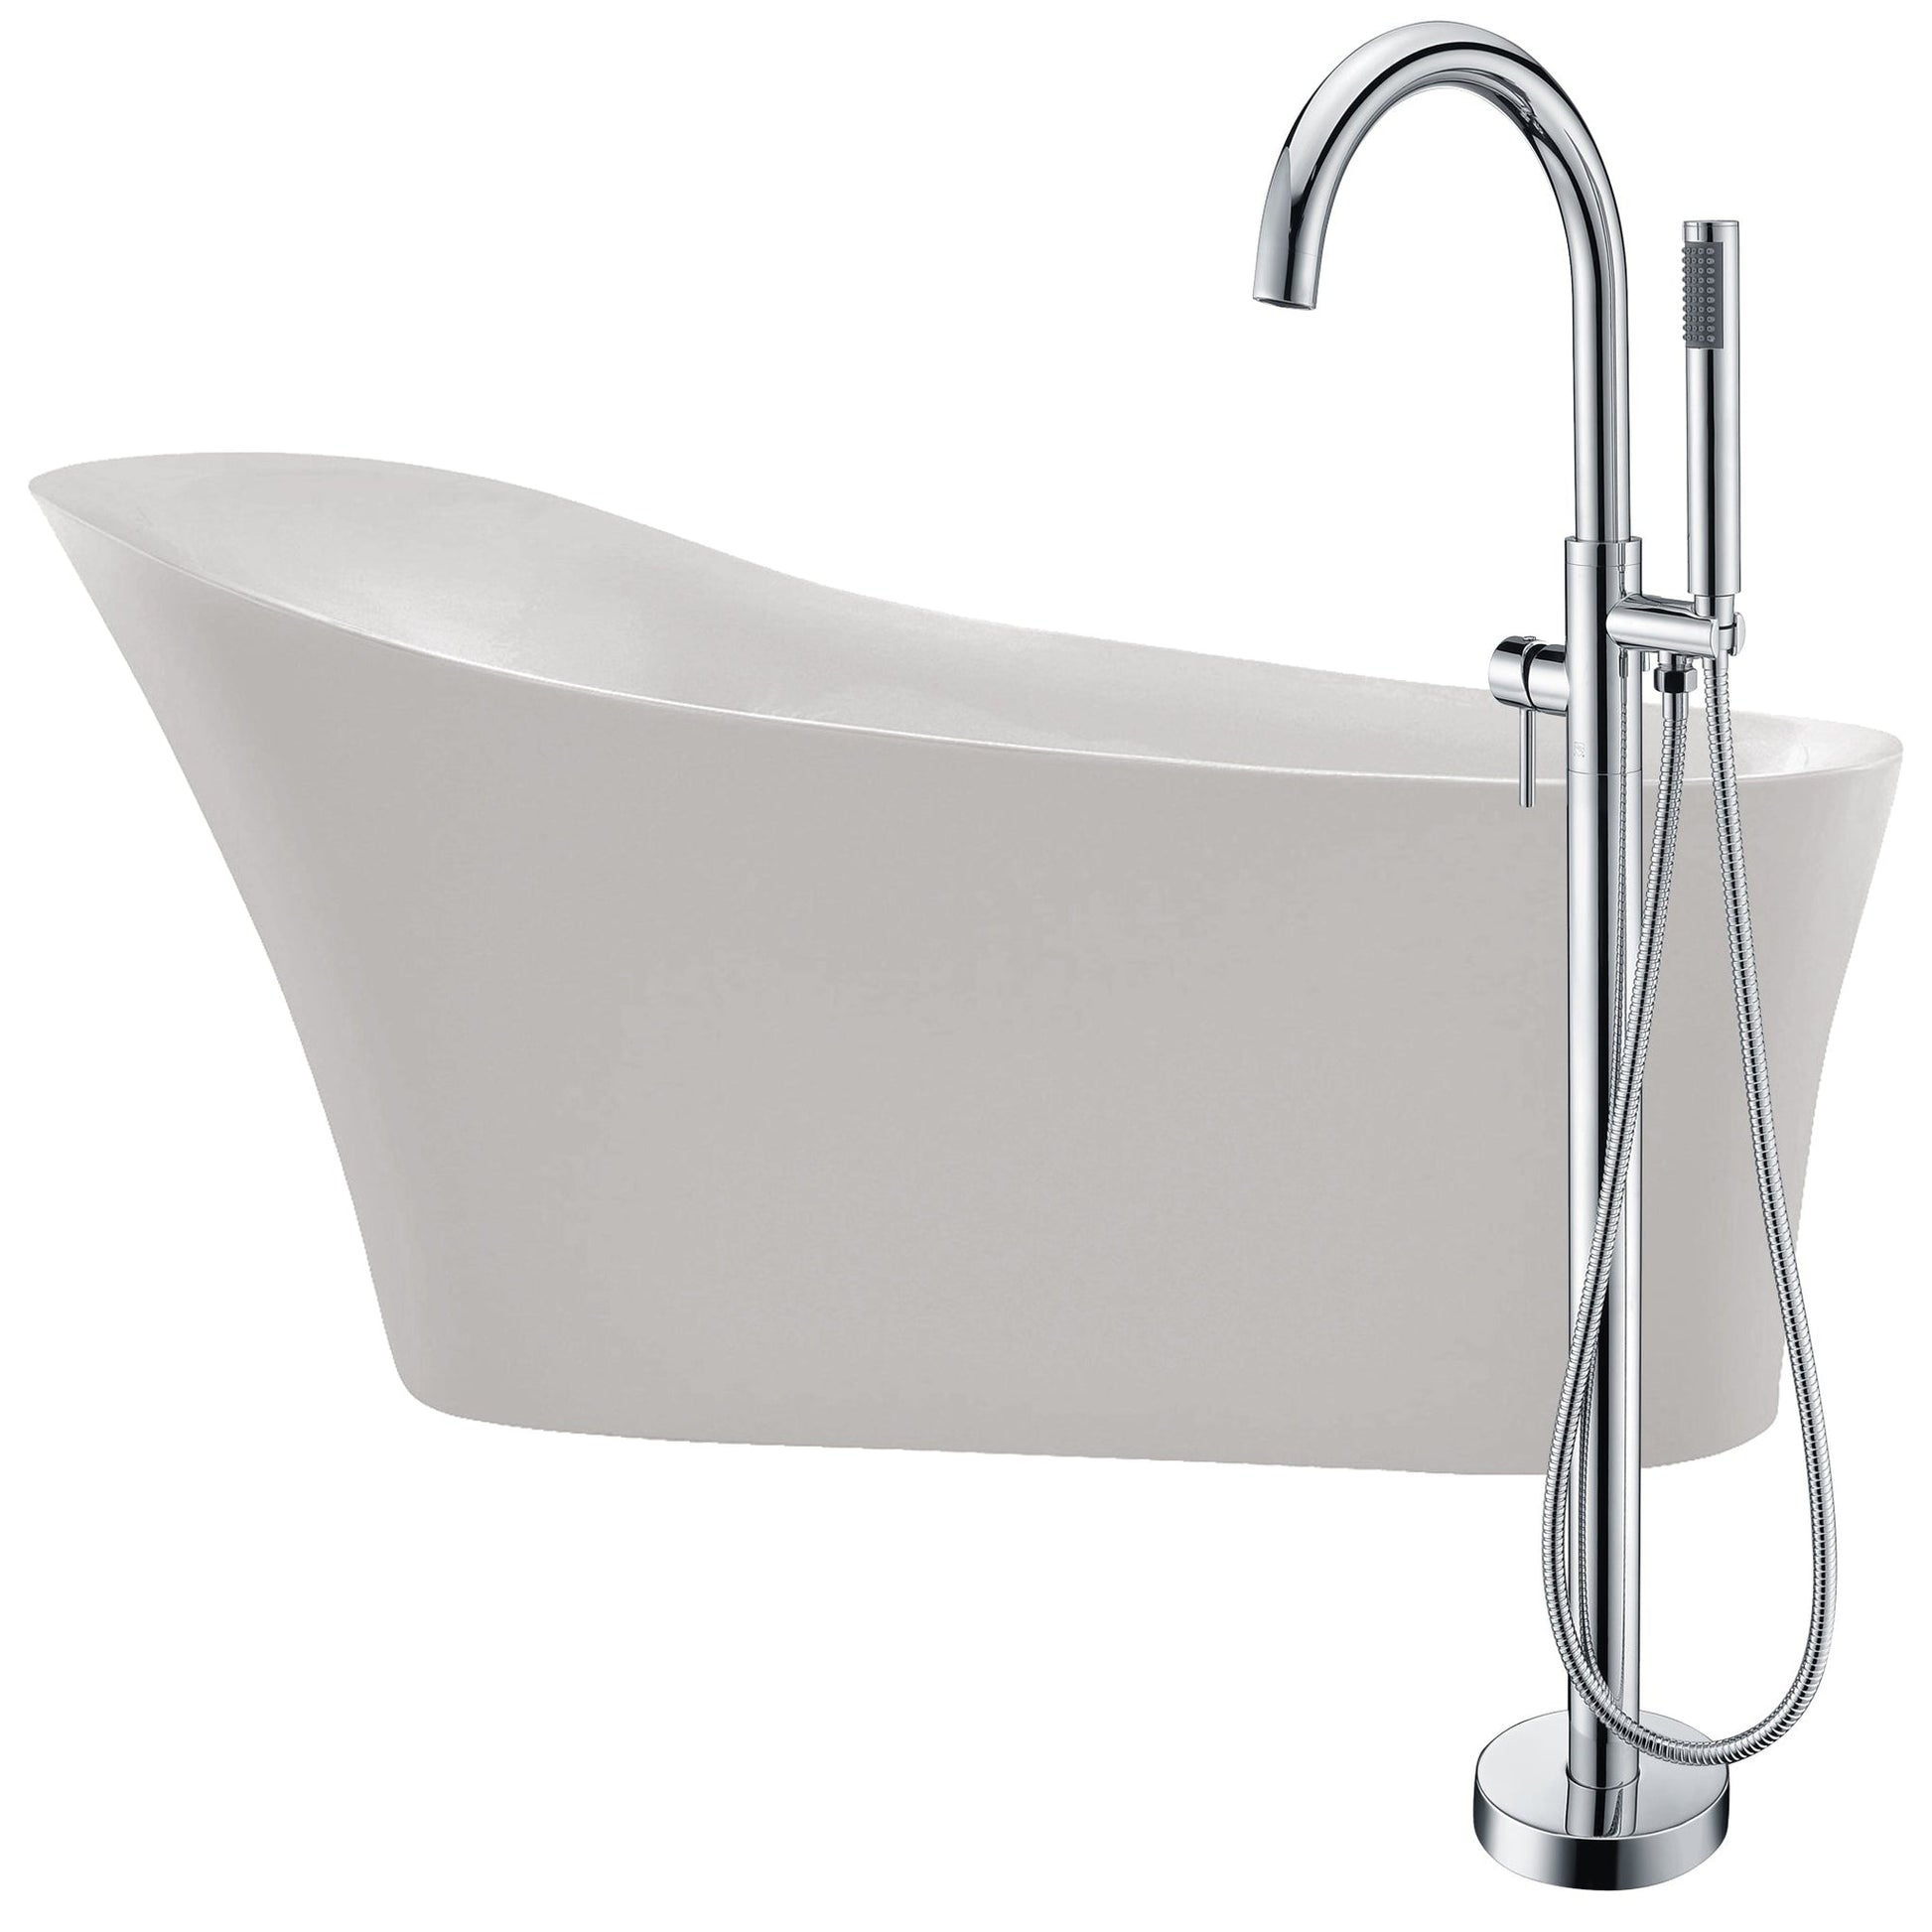 ANZZI Maple Series 67" x 31" Glossy White Freestanding Bathtub With Built-In Overflow, Pop Up Drain and Kros Bathtub Faucet